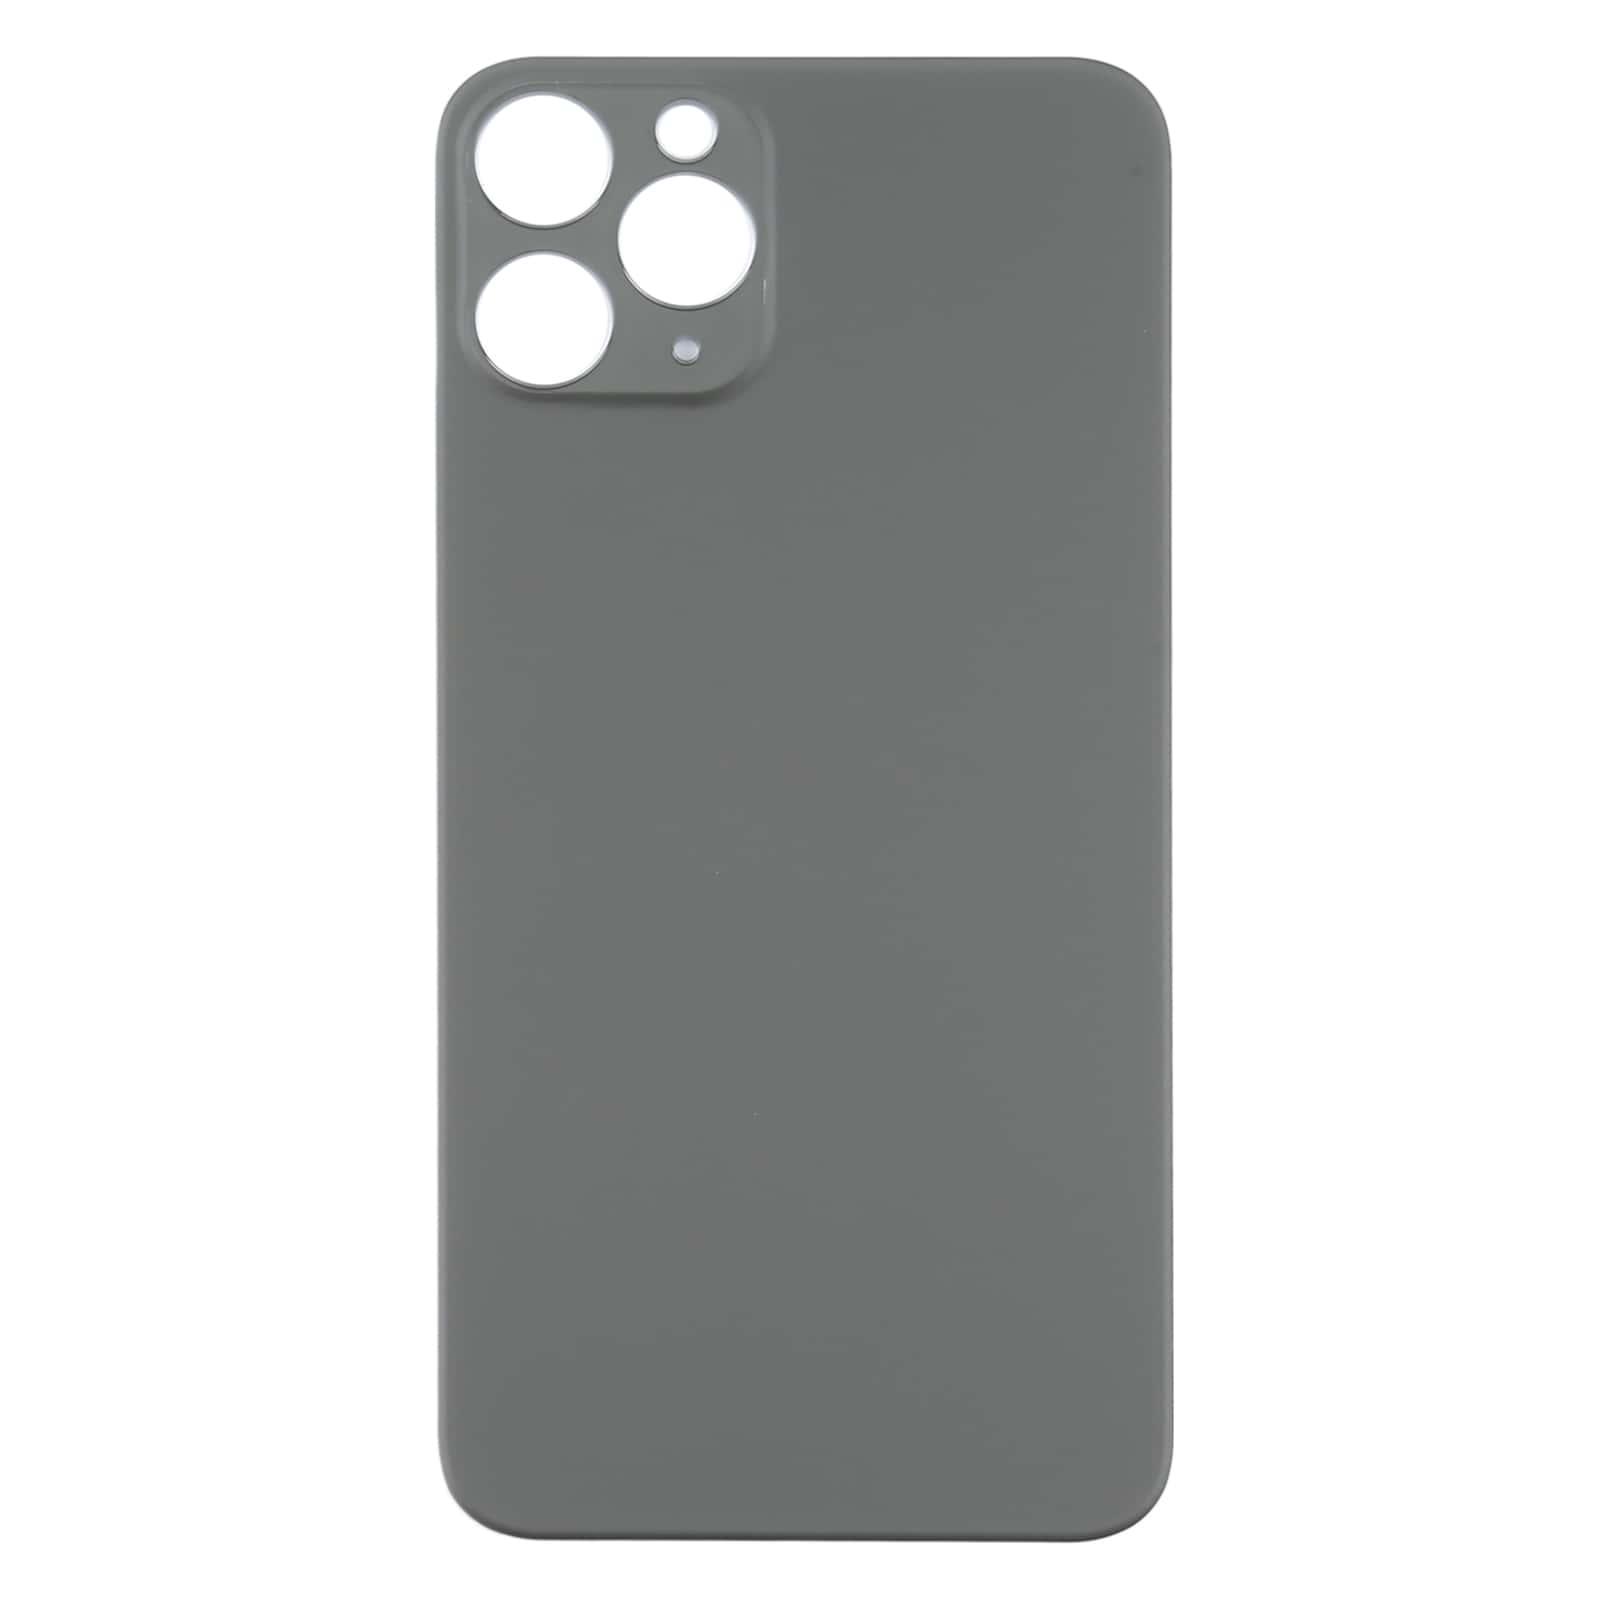 Back Glass Panel for  iPhone 12 Pro Max Graphite